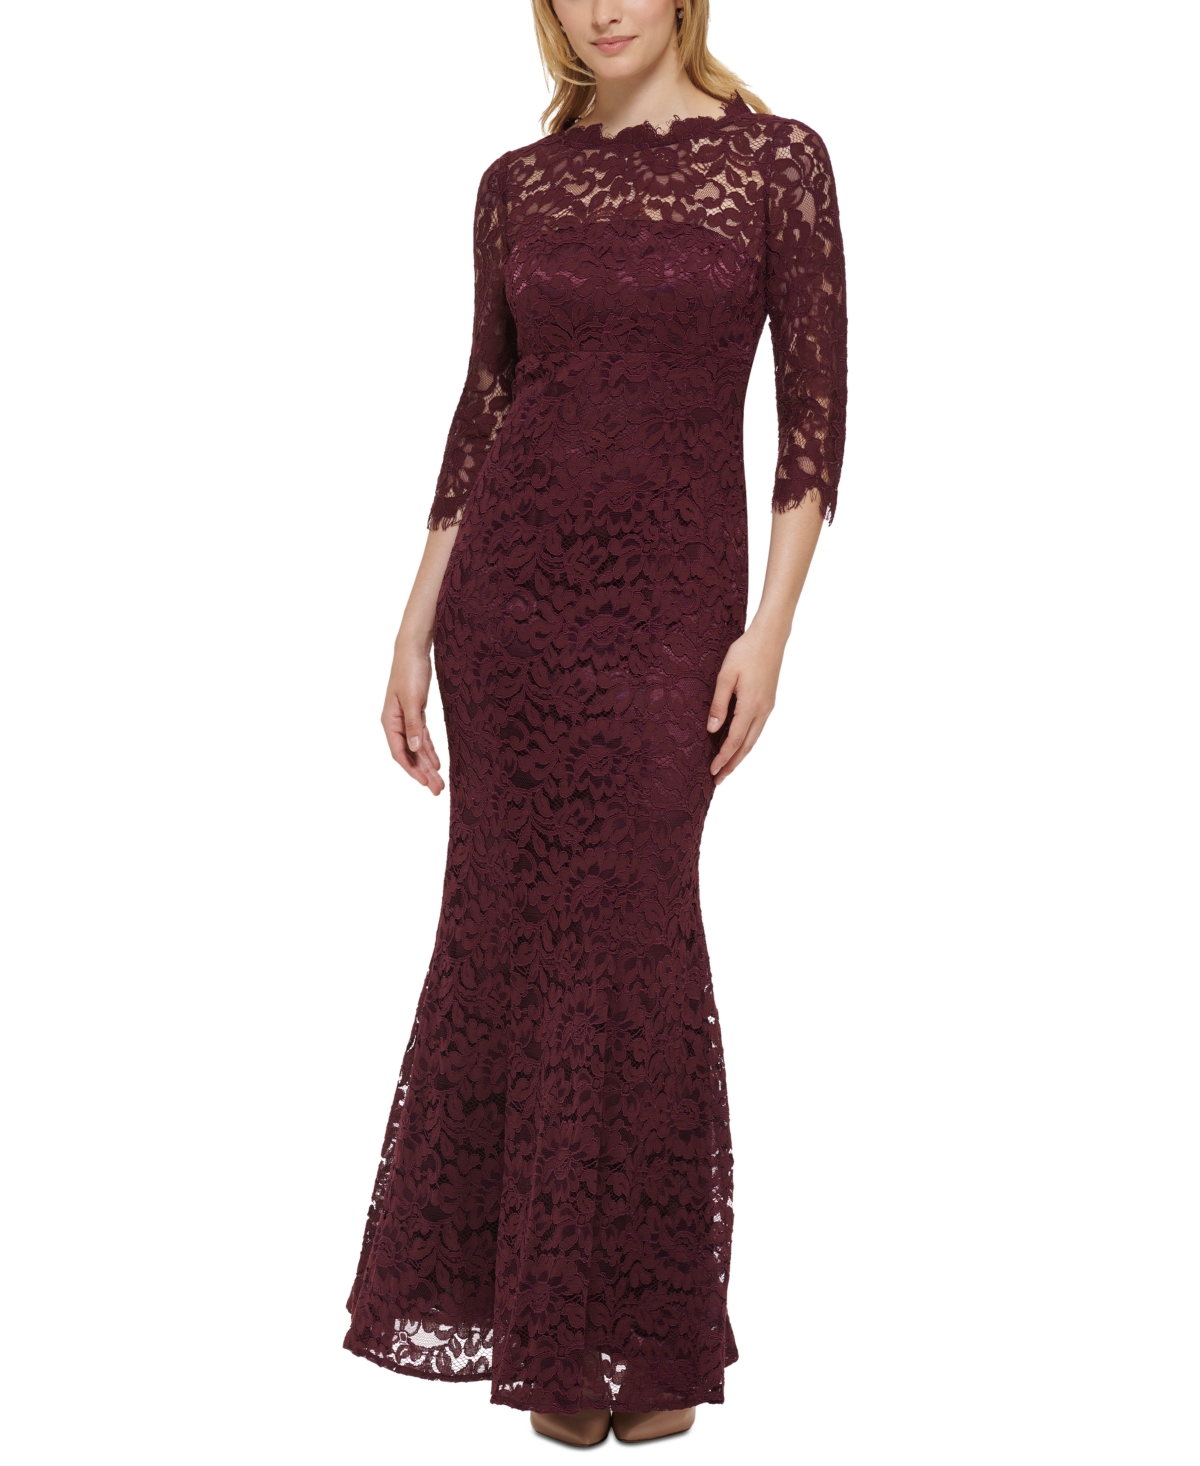 Women's Lace 3/4-Sleeve Mermaid Gown - Blush